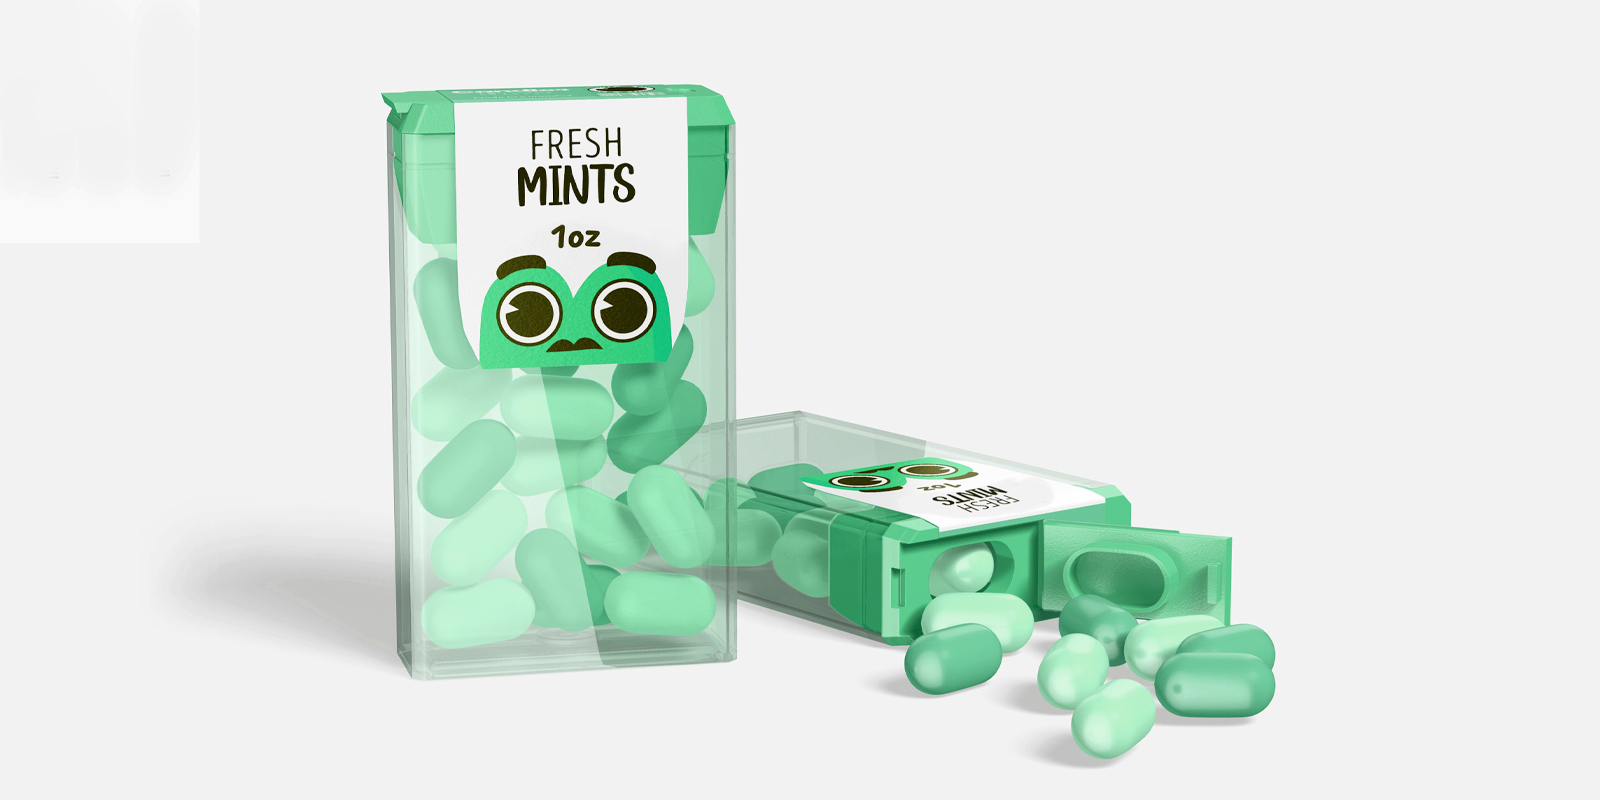 Mints in Paris - Print with Pagerr